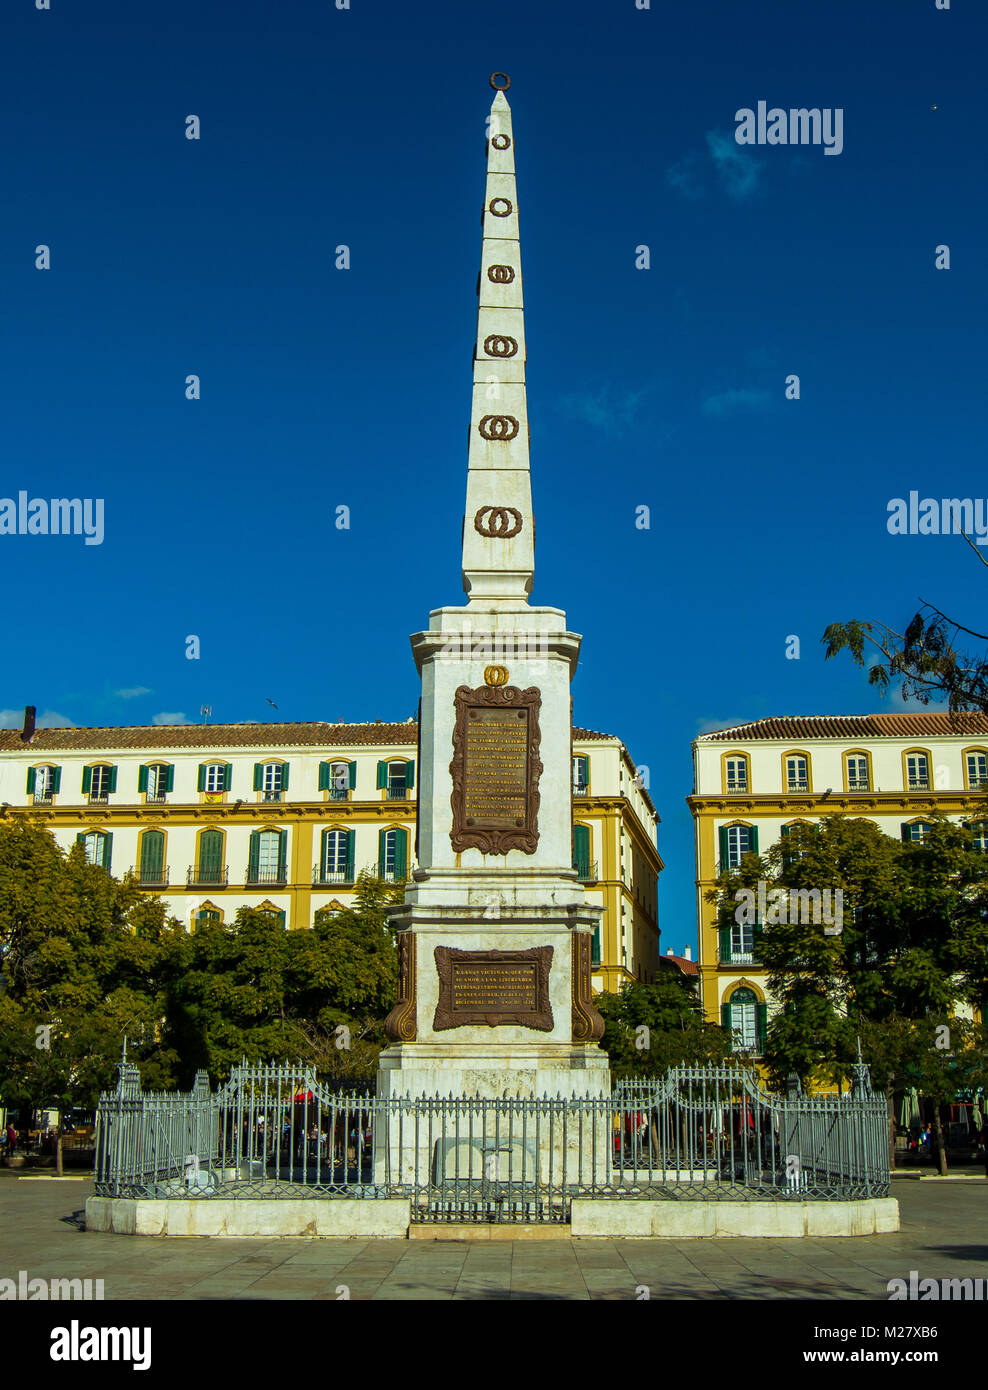 Views of the monument to Torrijos and buildings. Huge obelisk located in the Plaza de la Merced, birthplace of Picasso. December 2017, Málaga, Spain. Stock Photo